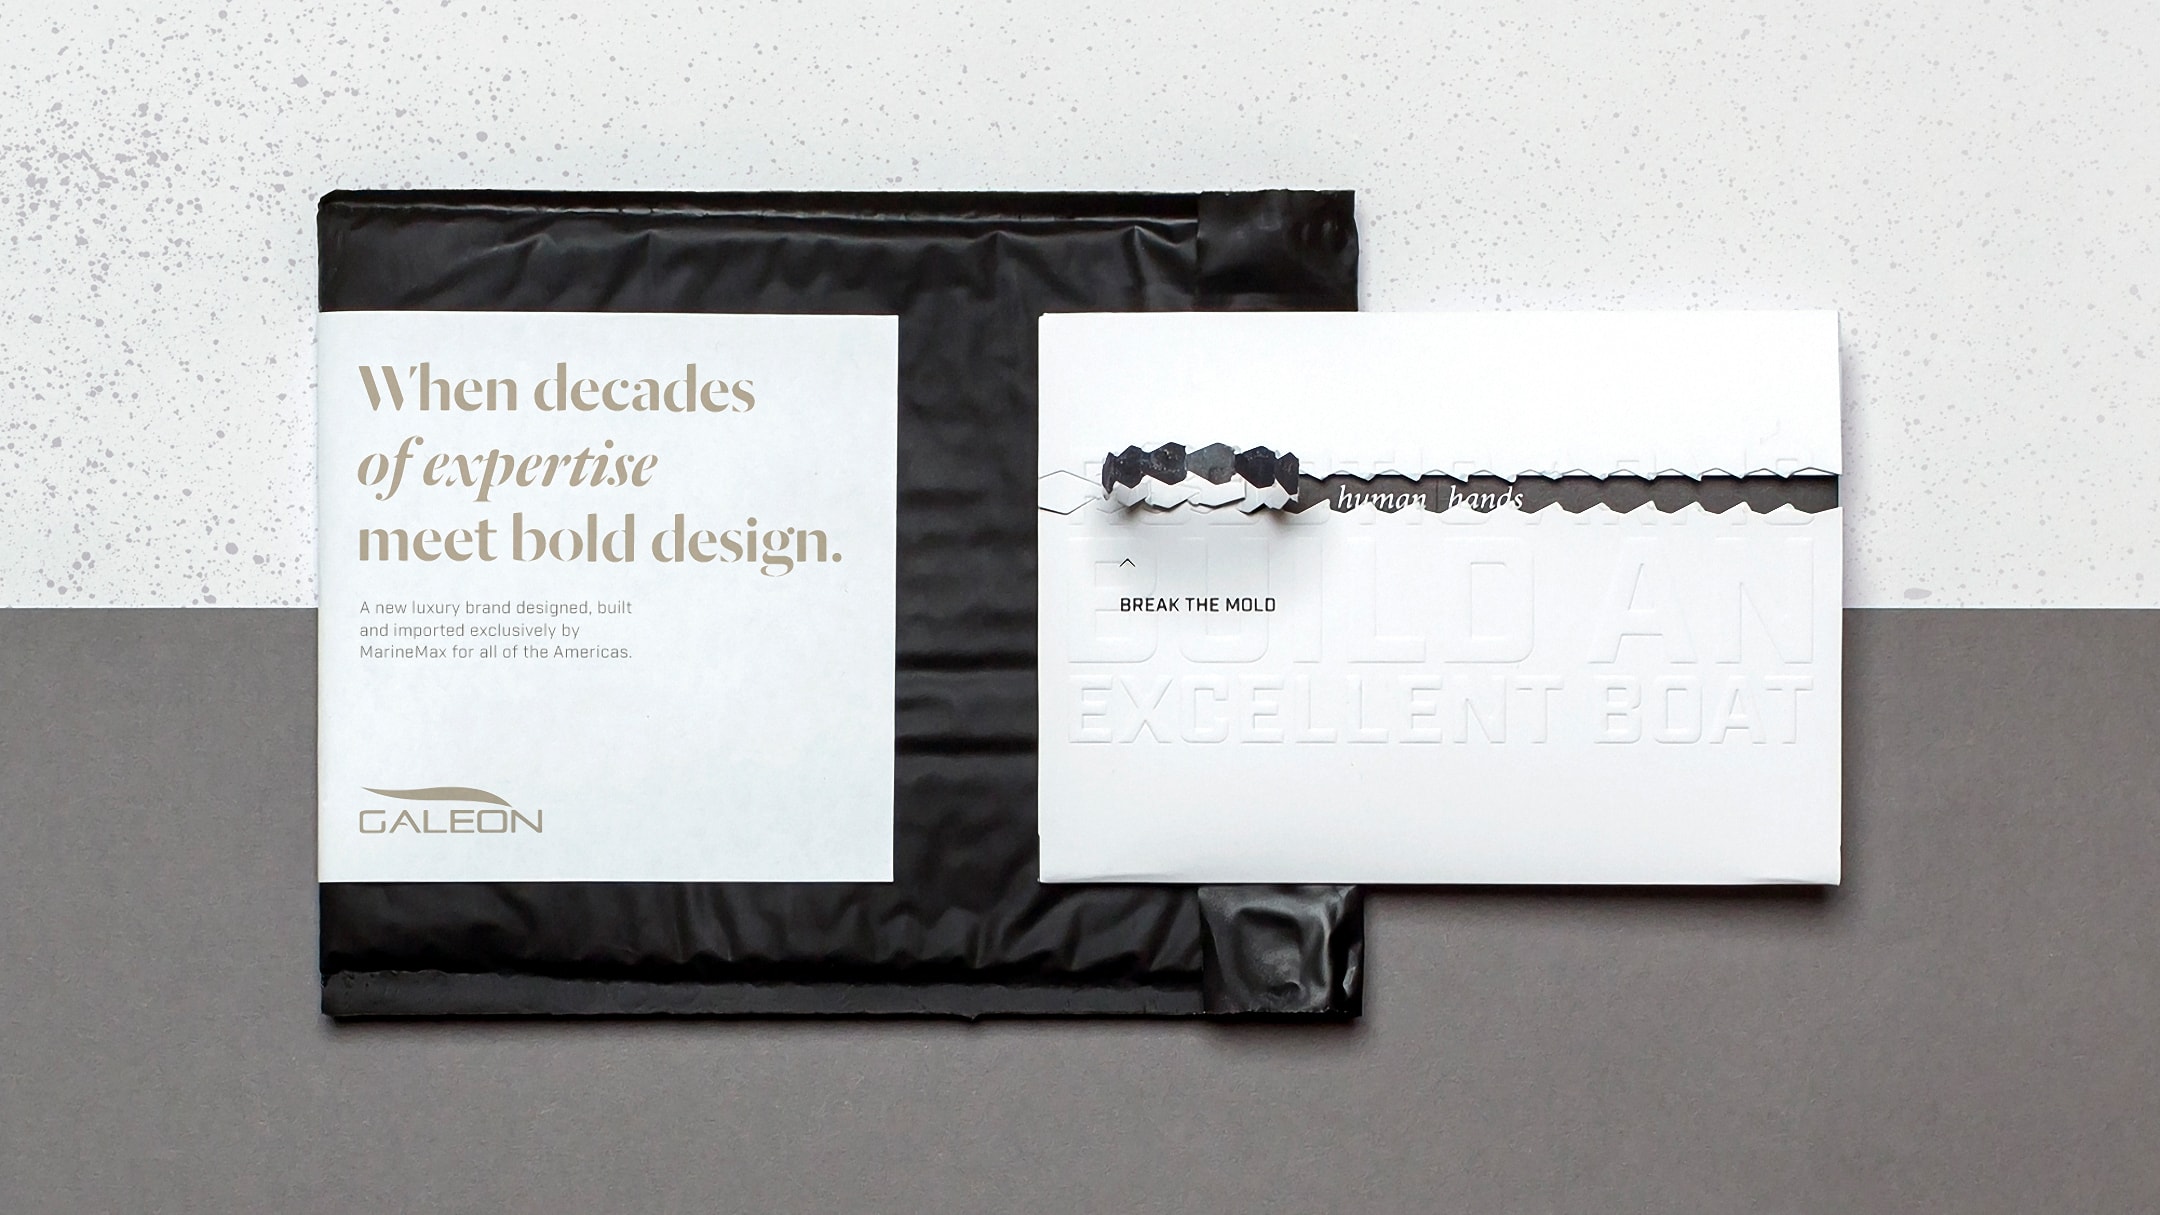 Galeon Yachts packaging created for their break the mold yacht campaign.